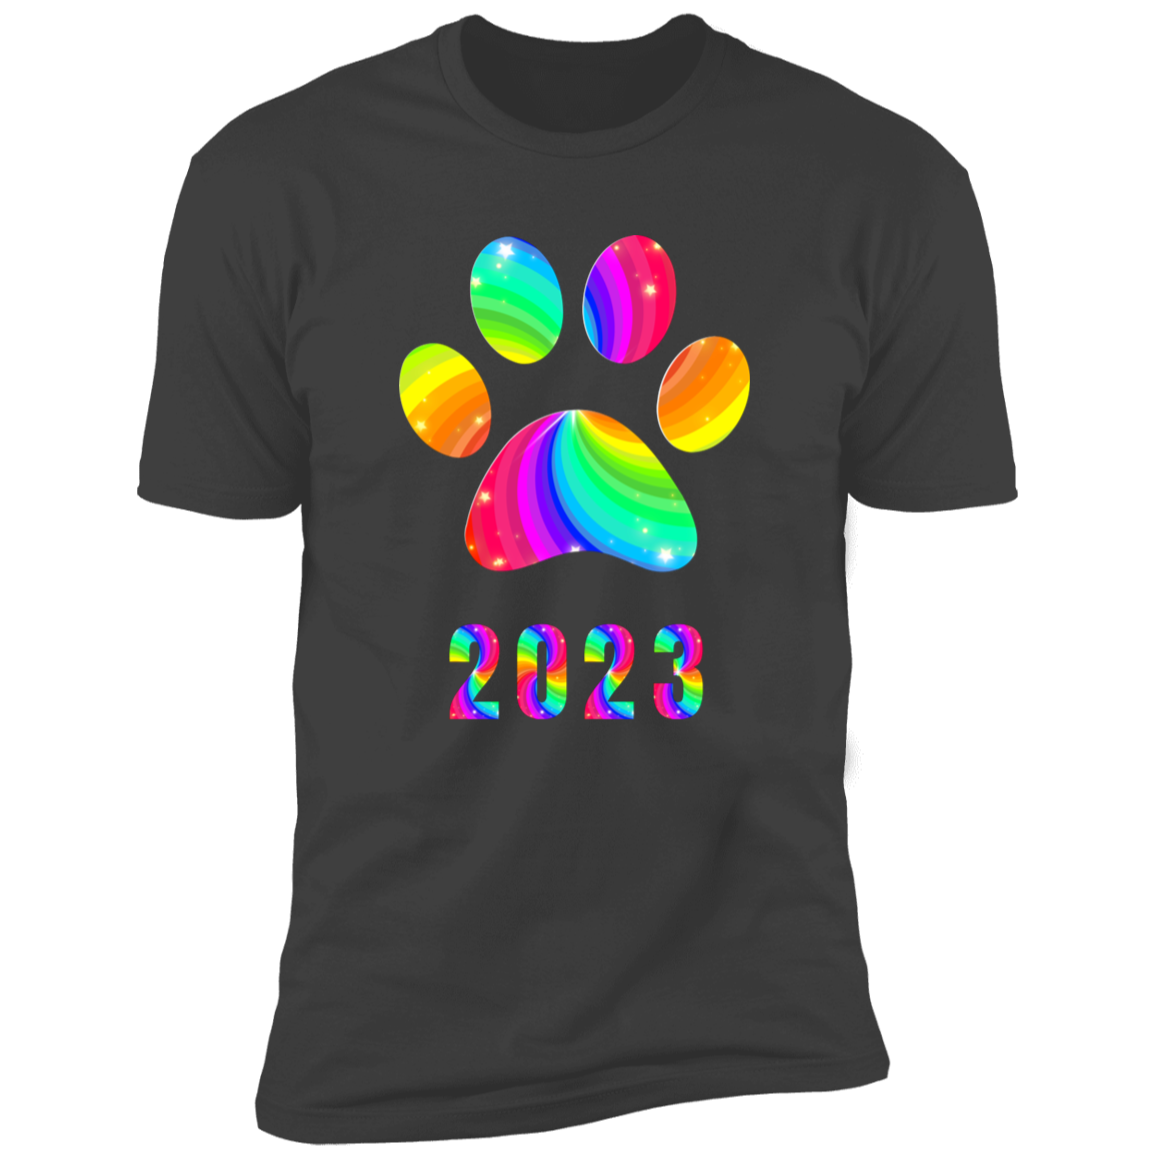 Pride Paw 2023 (Swirl) Pride T-shirt, Paw Pride Dog Shirt for humans, in heavy metal gray